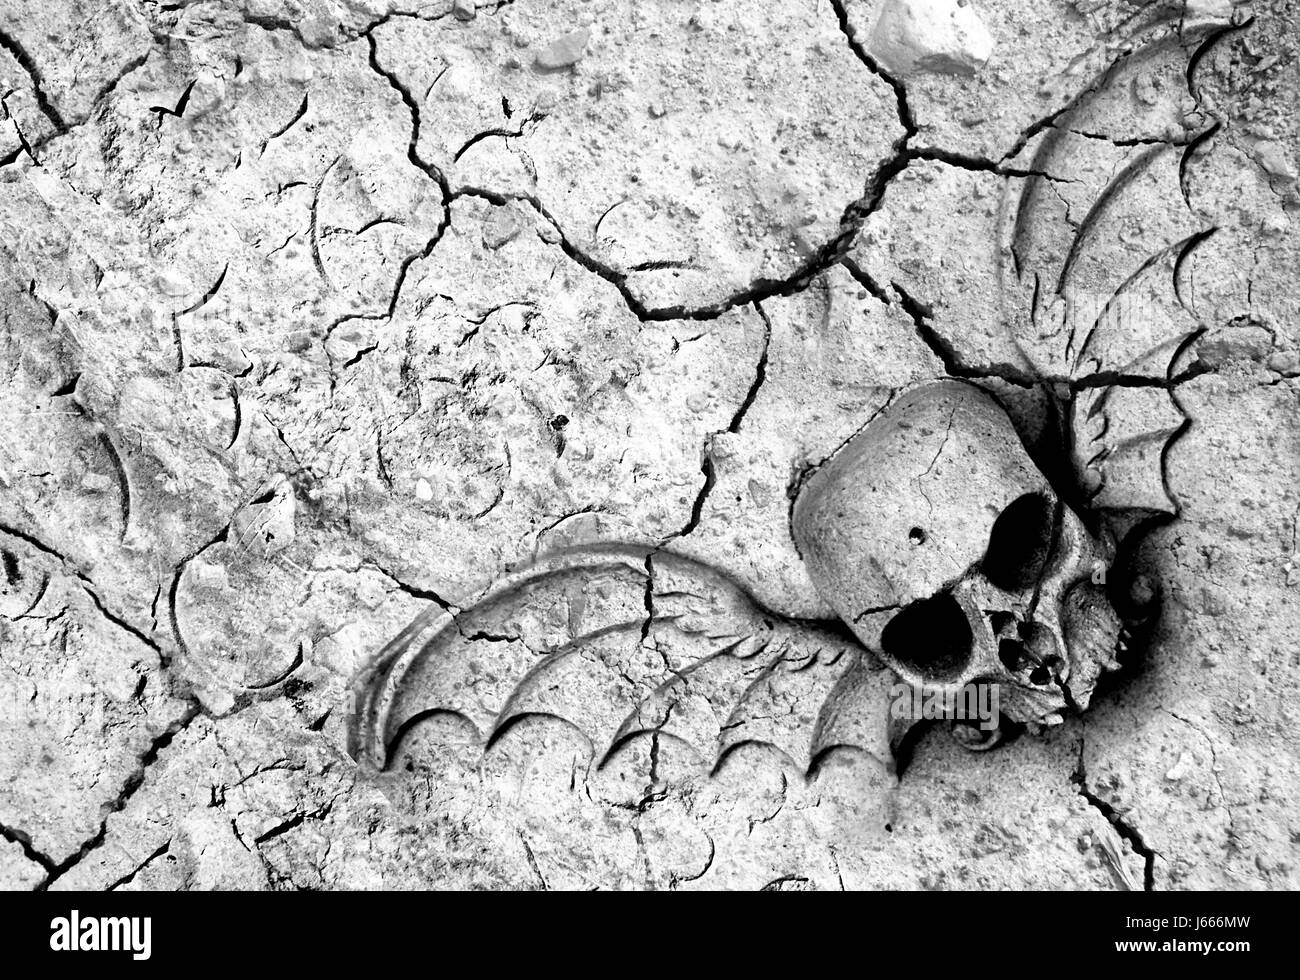 ground soil earth humus grave skull drought dry dried up barren crack fissured Stock Photo